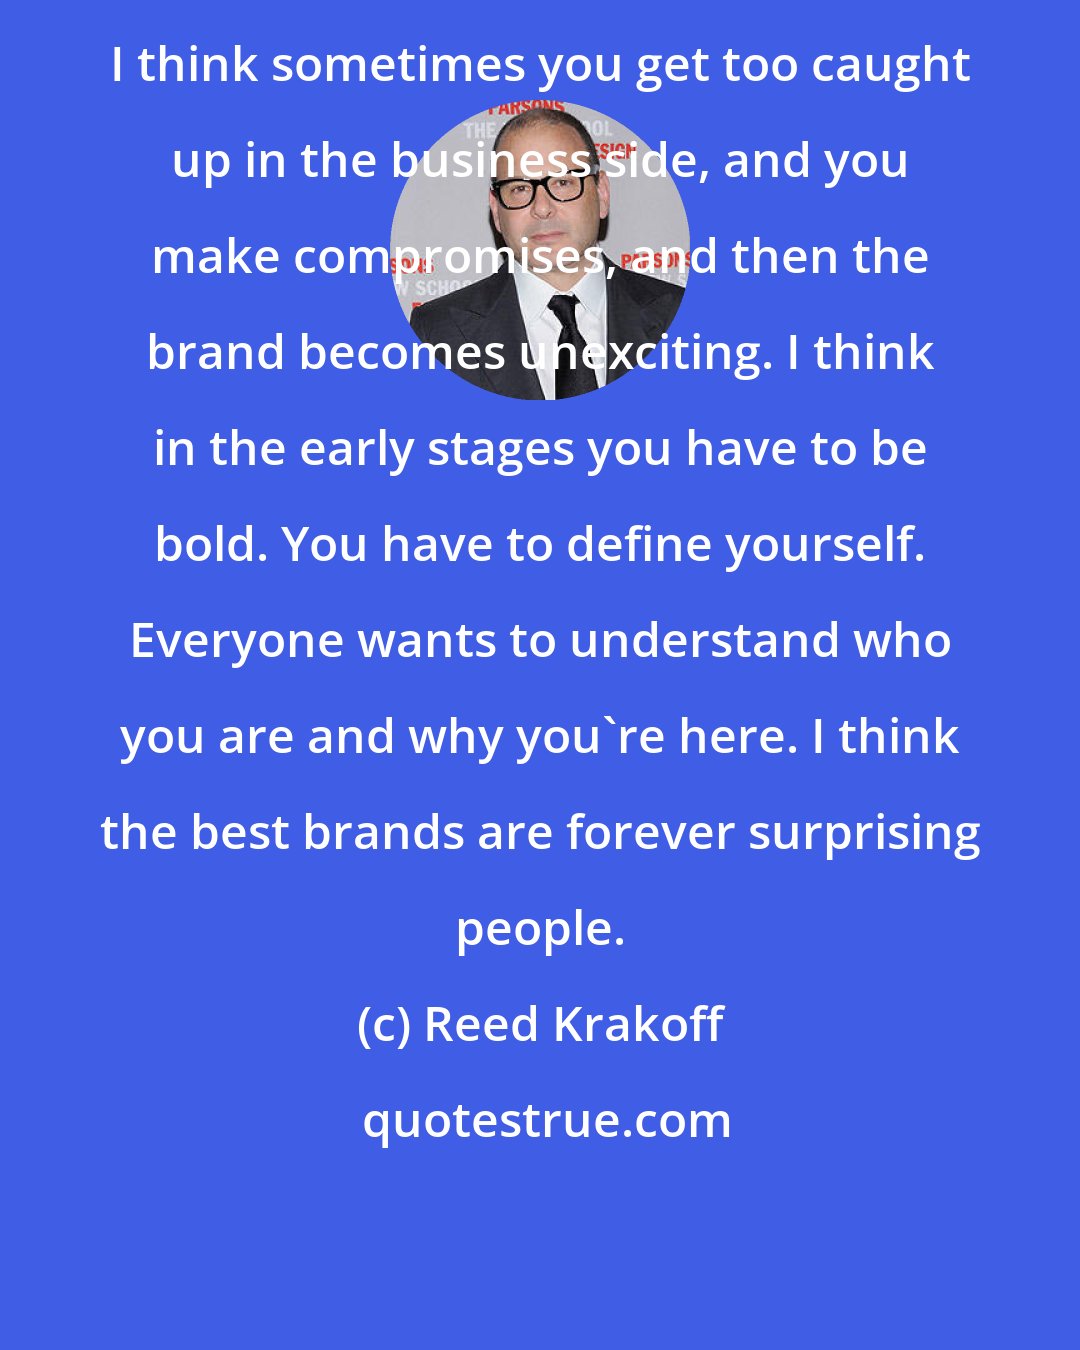 Reed Krakoff: I think sometimes you get too caught up in the business side, and you make compromises, and then the brand becomes unexciting. I think in the early stages you have to be bold. You have to define yourself. Everyone wants to understand who you are and why you're here. I think the best brands are forever surprising people.